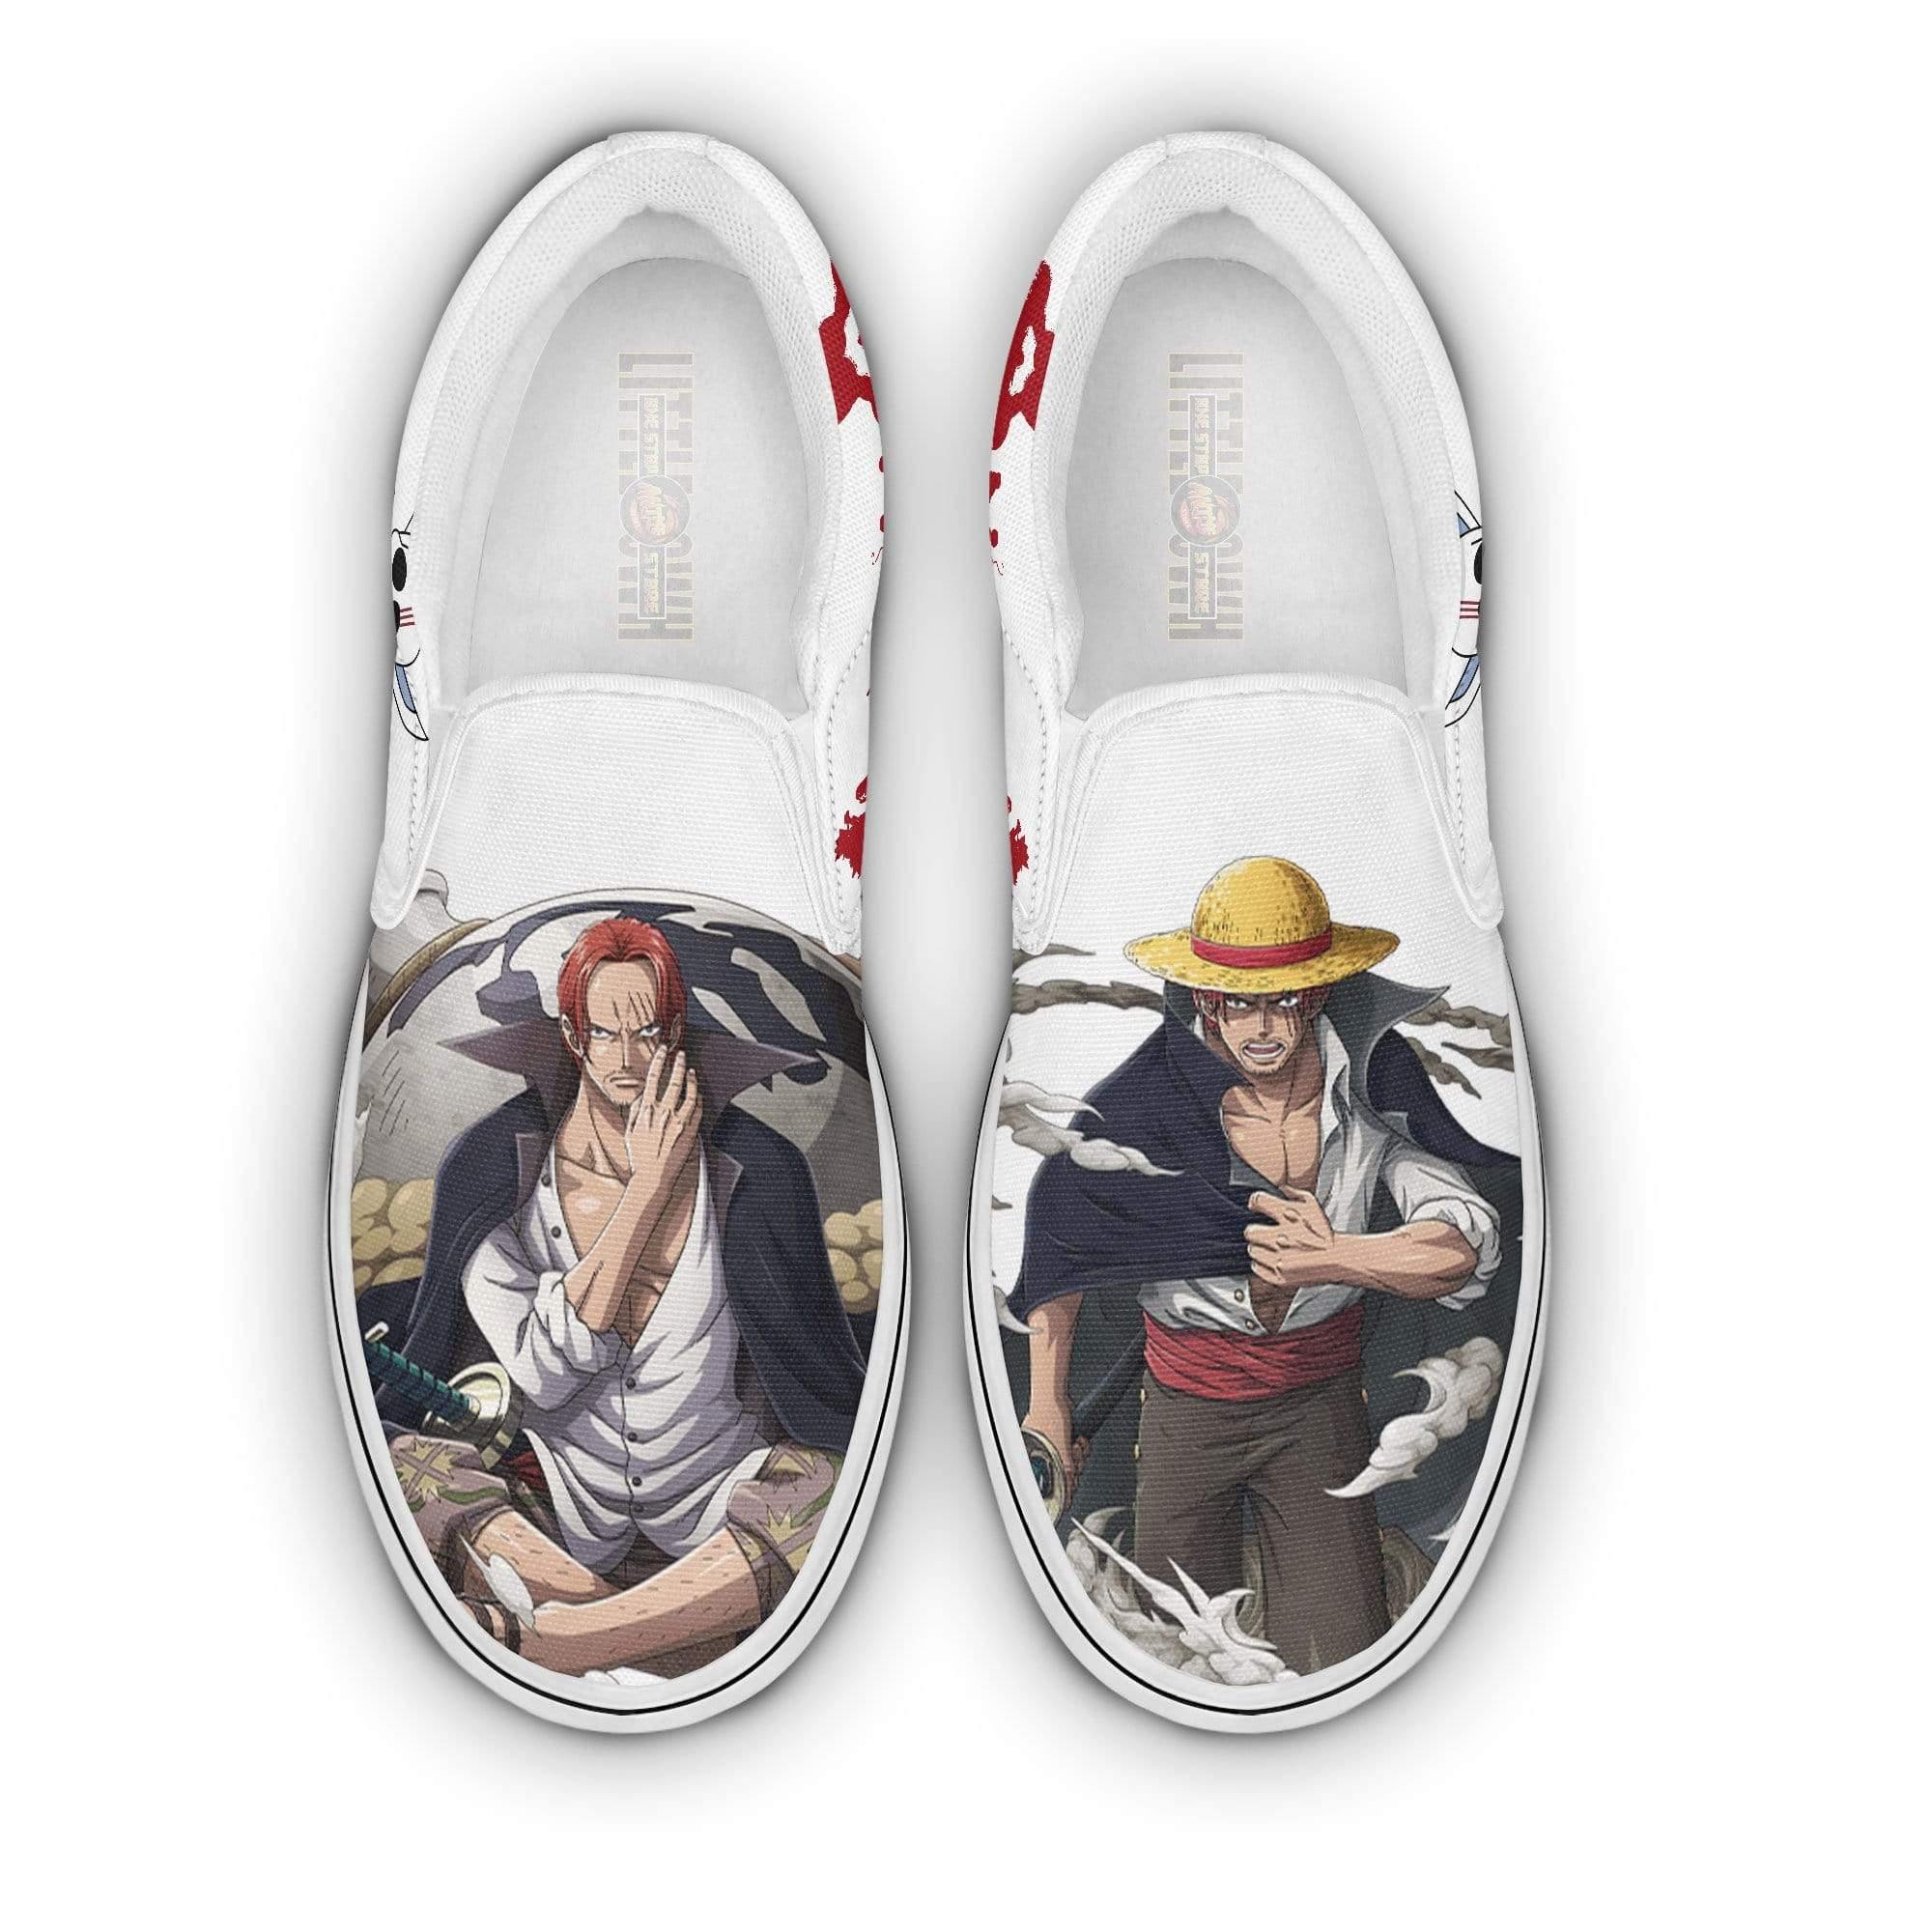 Shanks One Piece Shoes Custom Anime Flat Slip On Sneakers